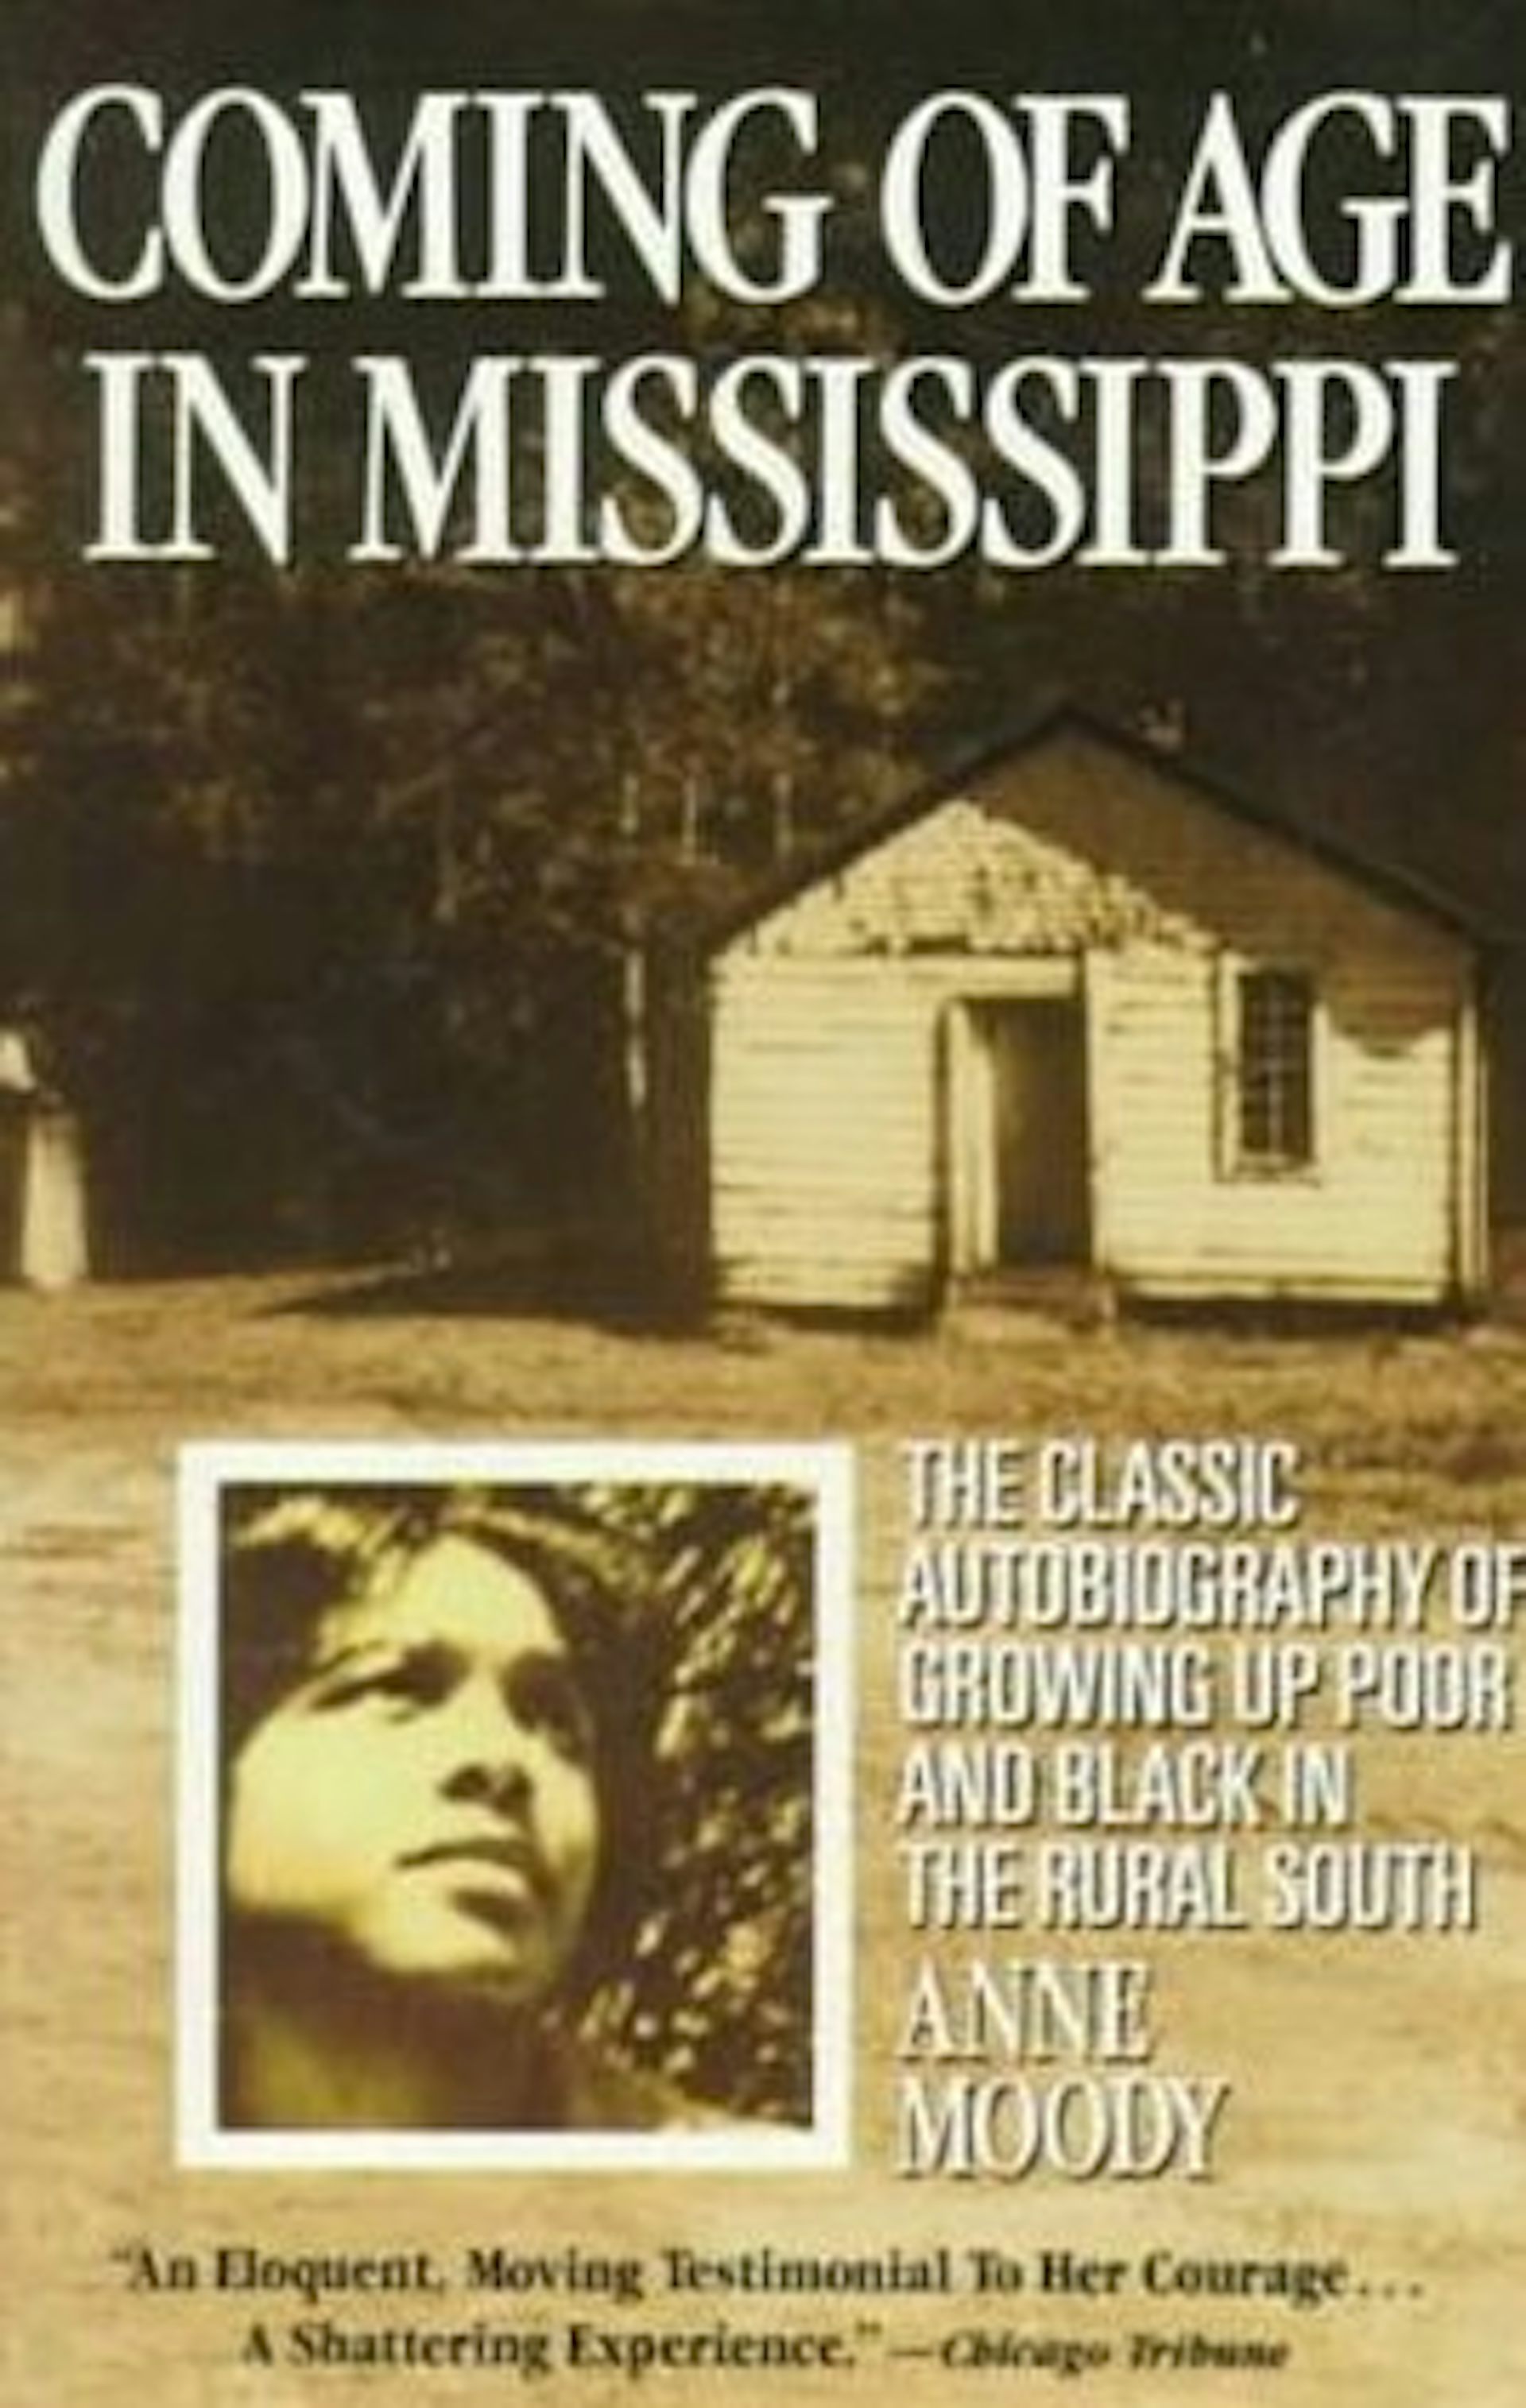 moody coming of age in mississippi